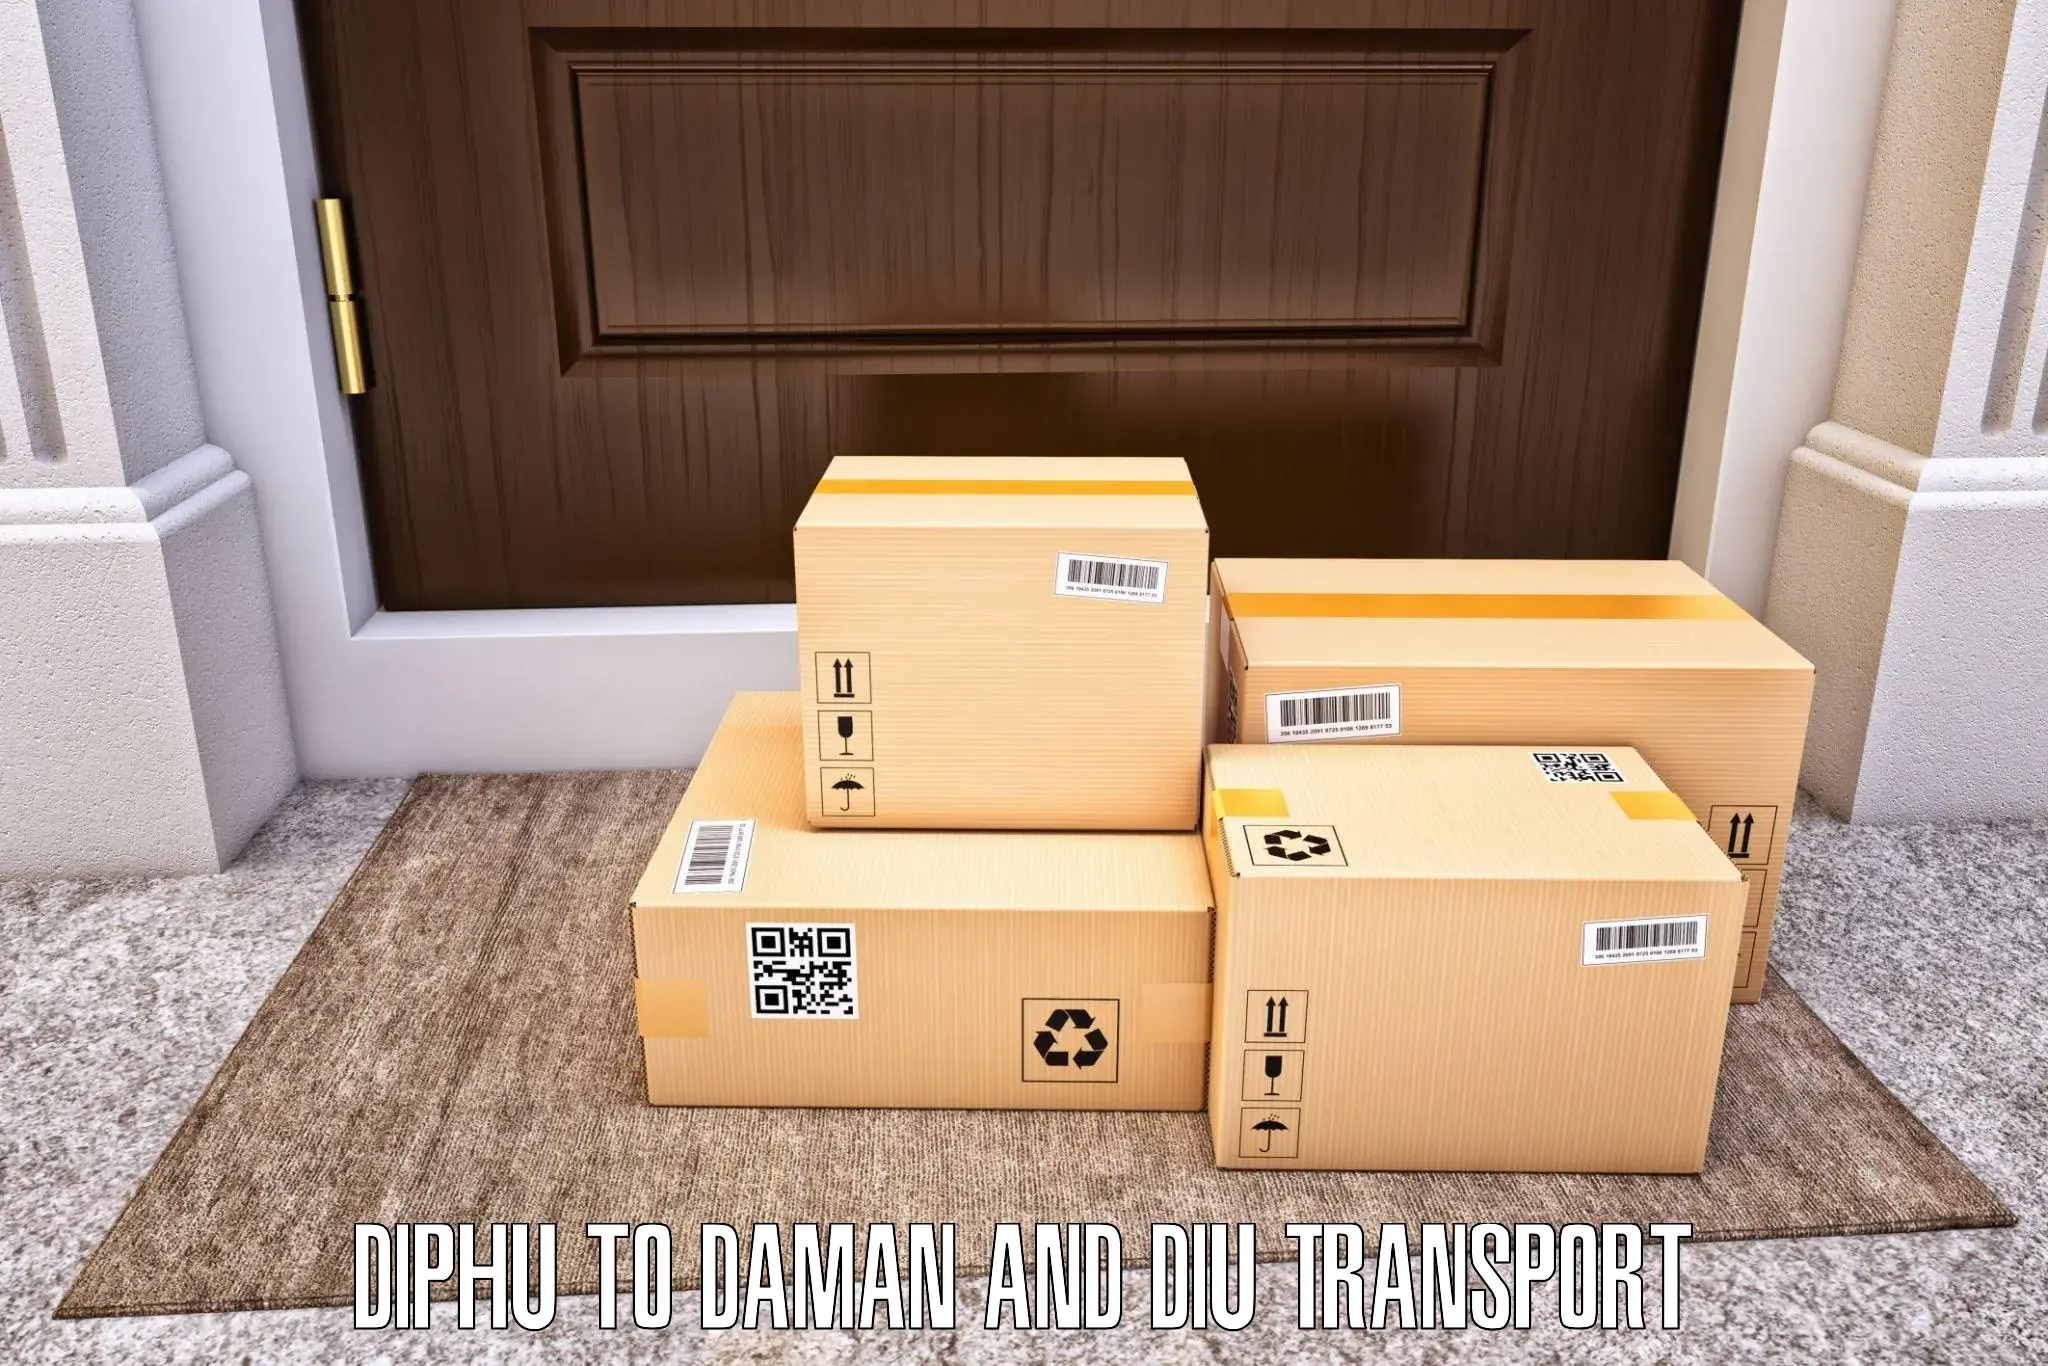 Domestic goods transportation services Diphu to Daman